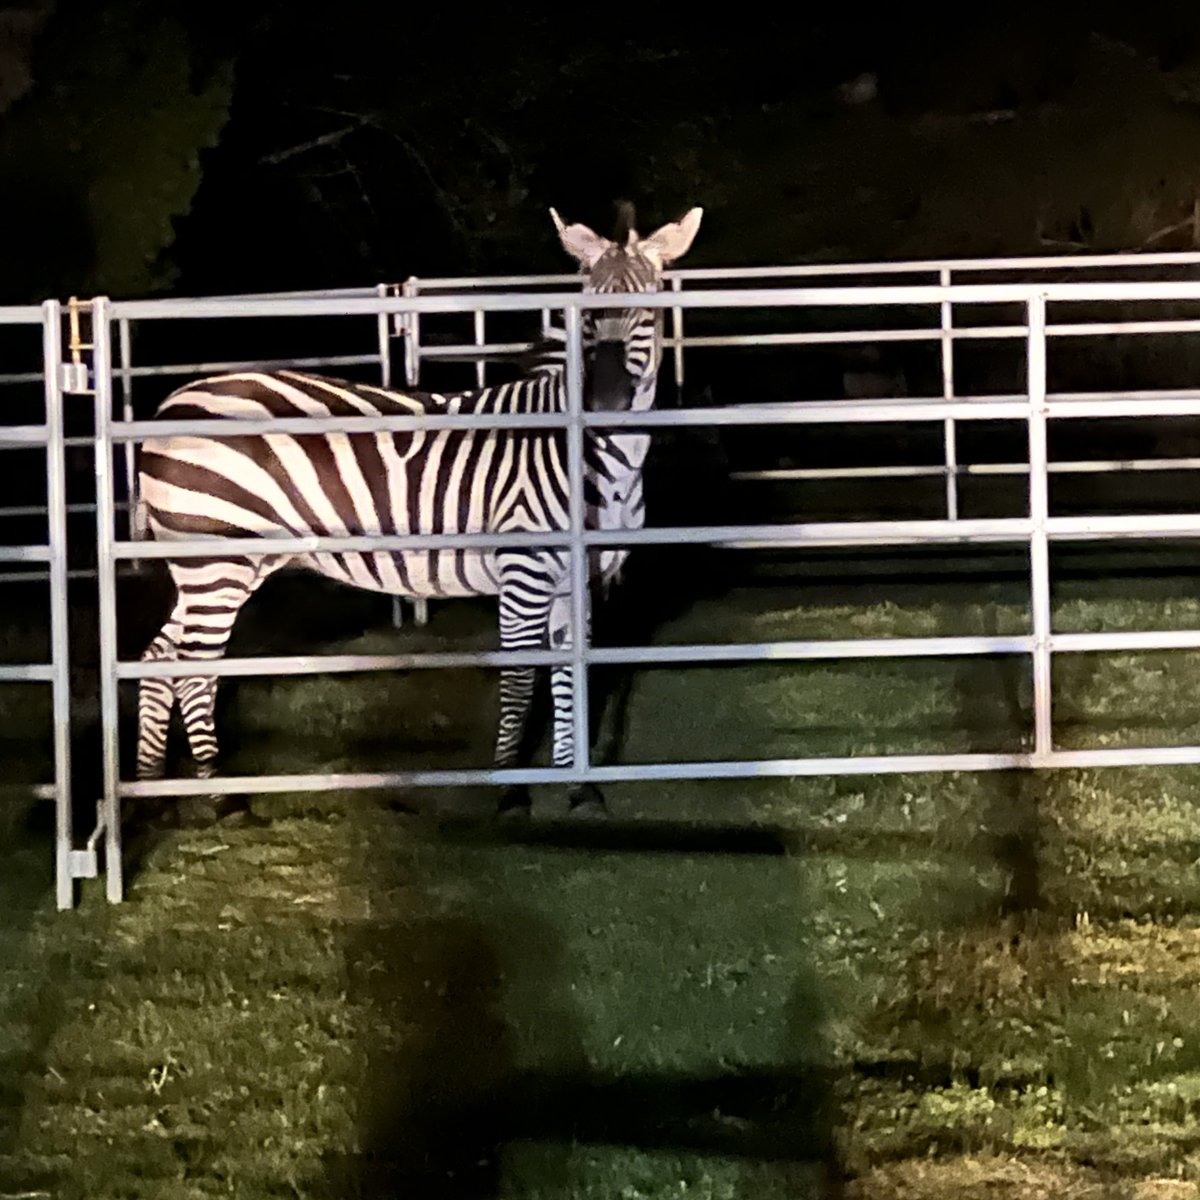 SUCCESS! The last of four zebras that had been on the run for almost six days has been safely captured. We'll provide updates on our blog at TailsFromRASKC.com